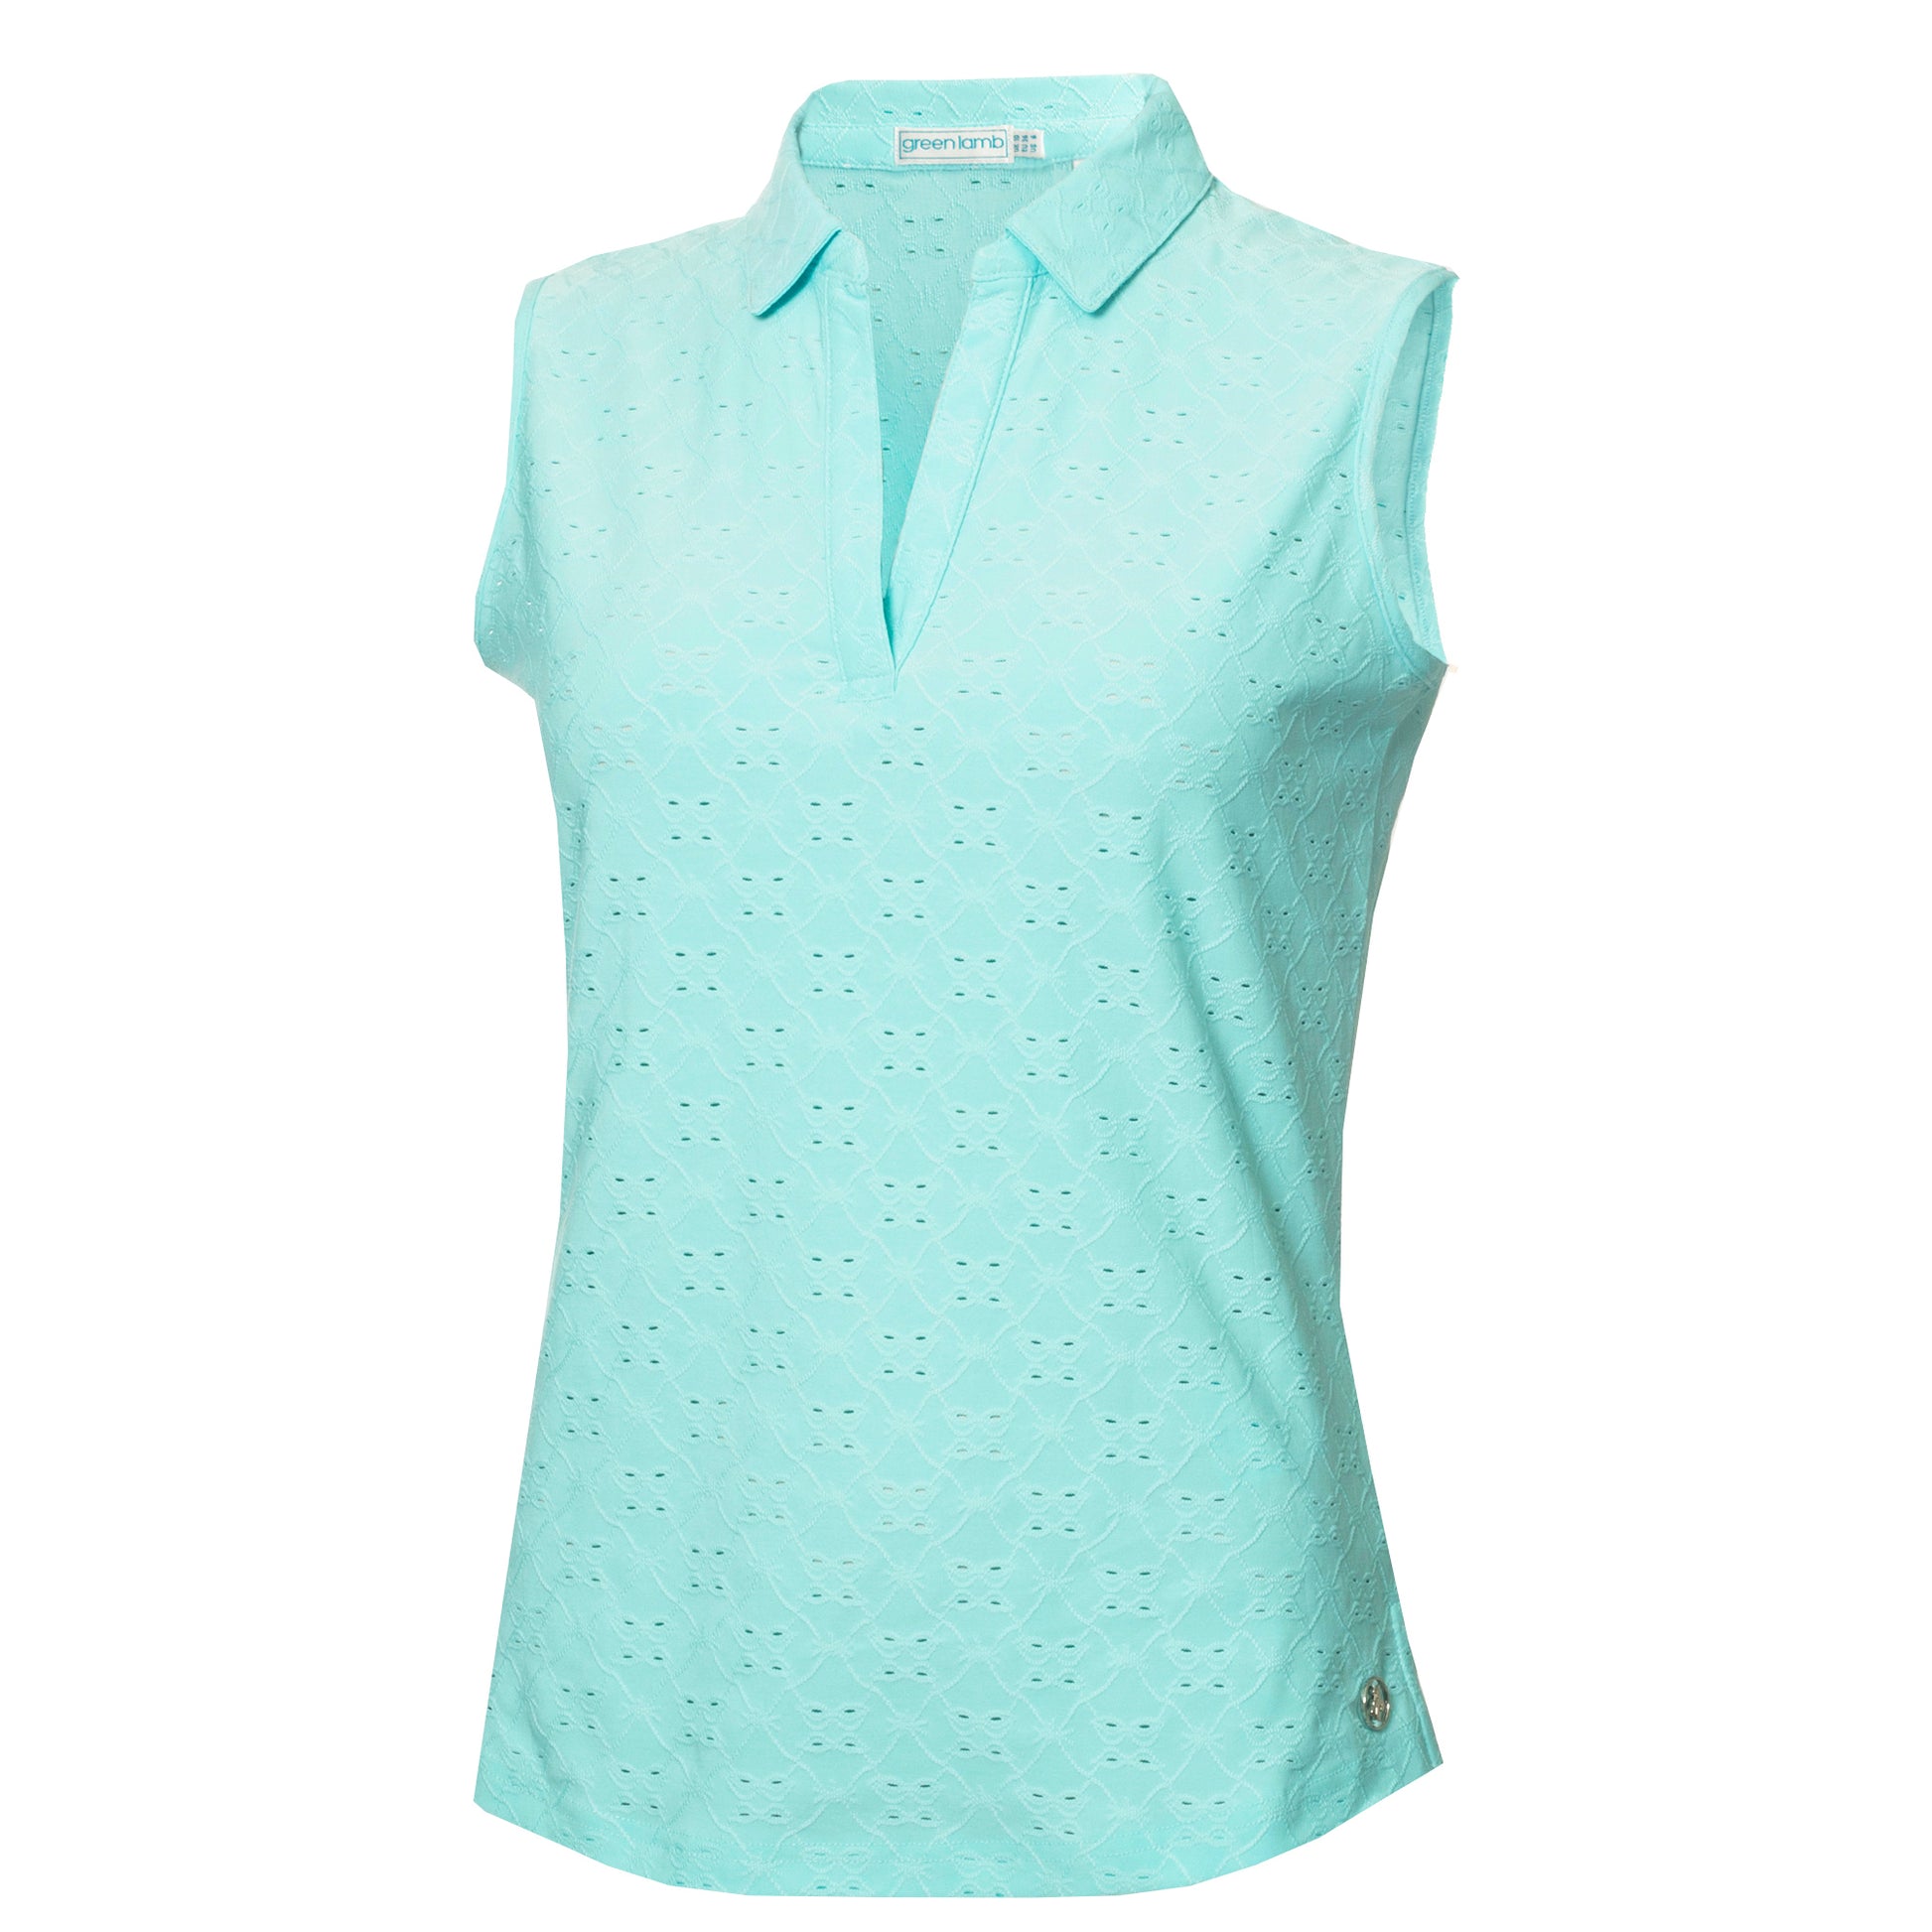 Green Lamb Ladies Sleeveless Polo with Broderie Anglaise Pattern in Aqua